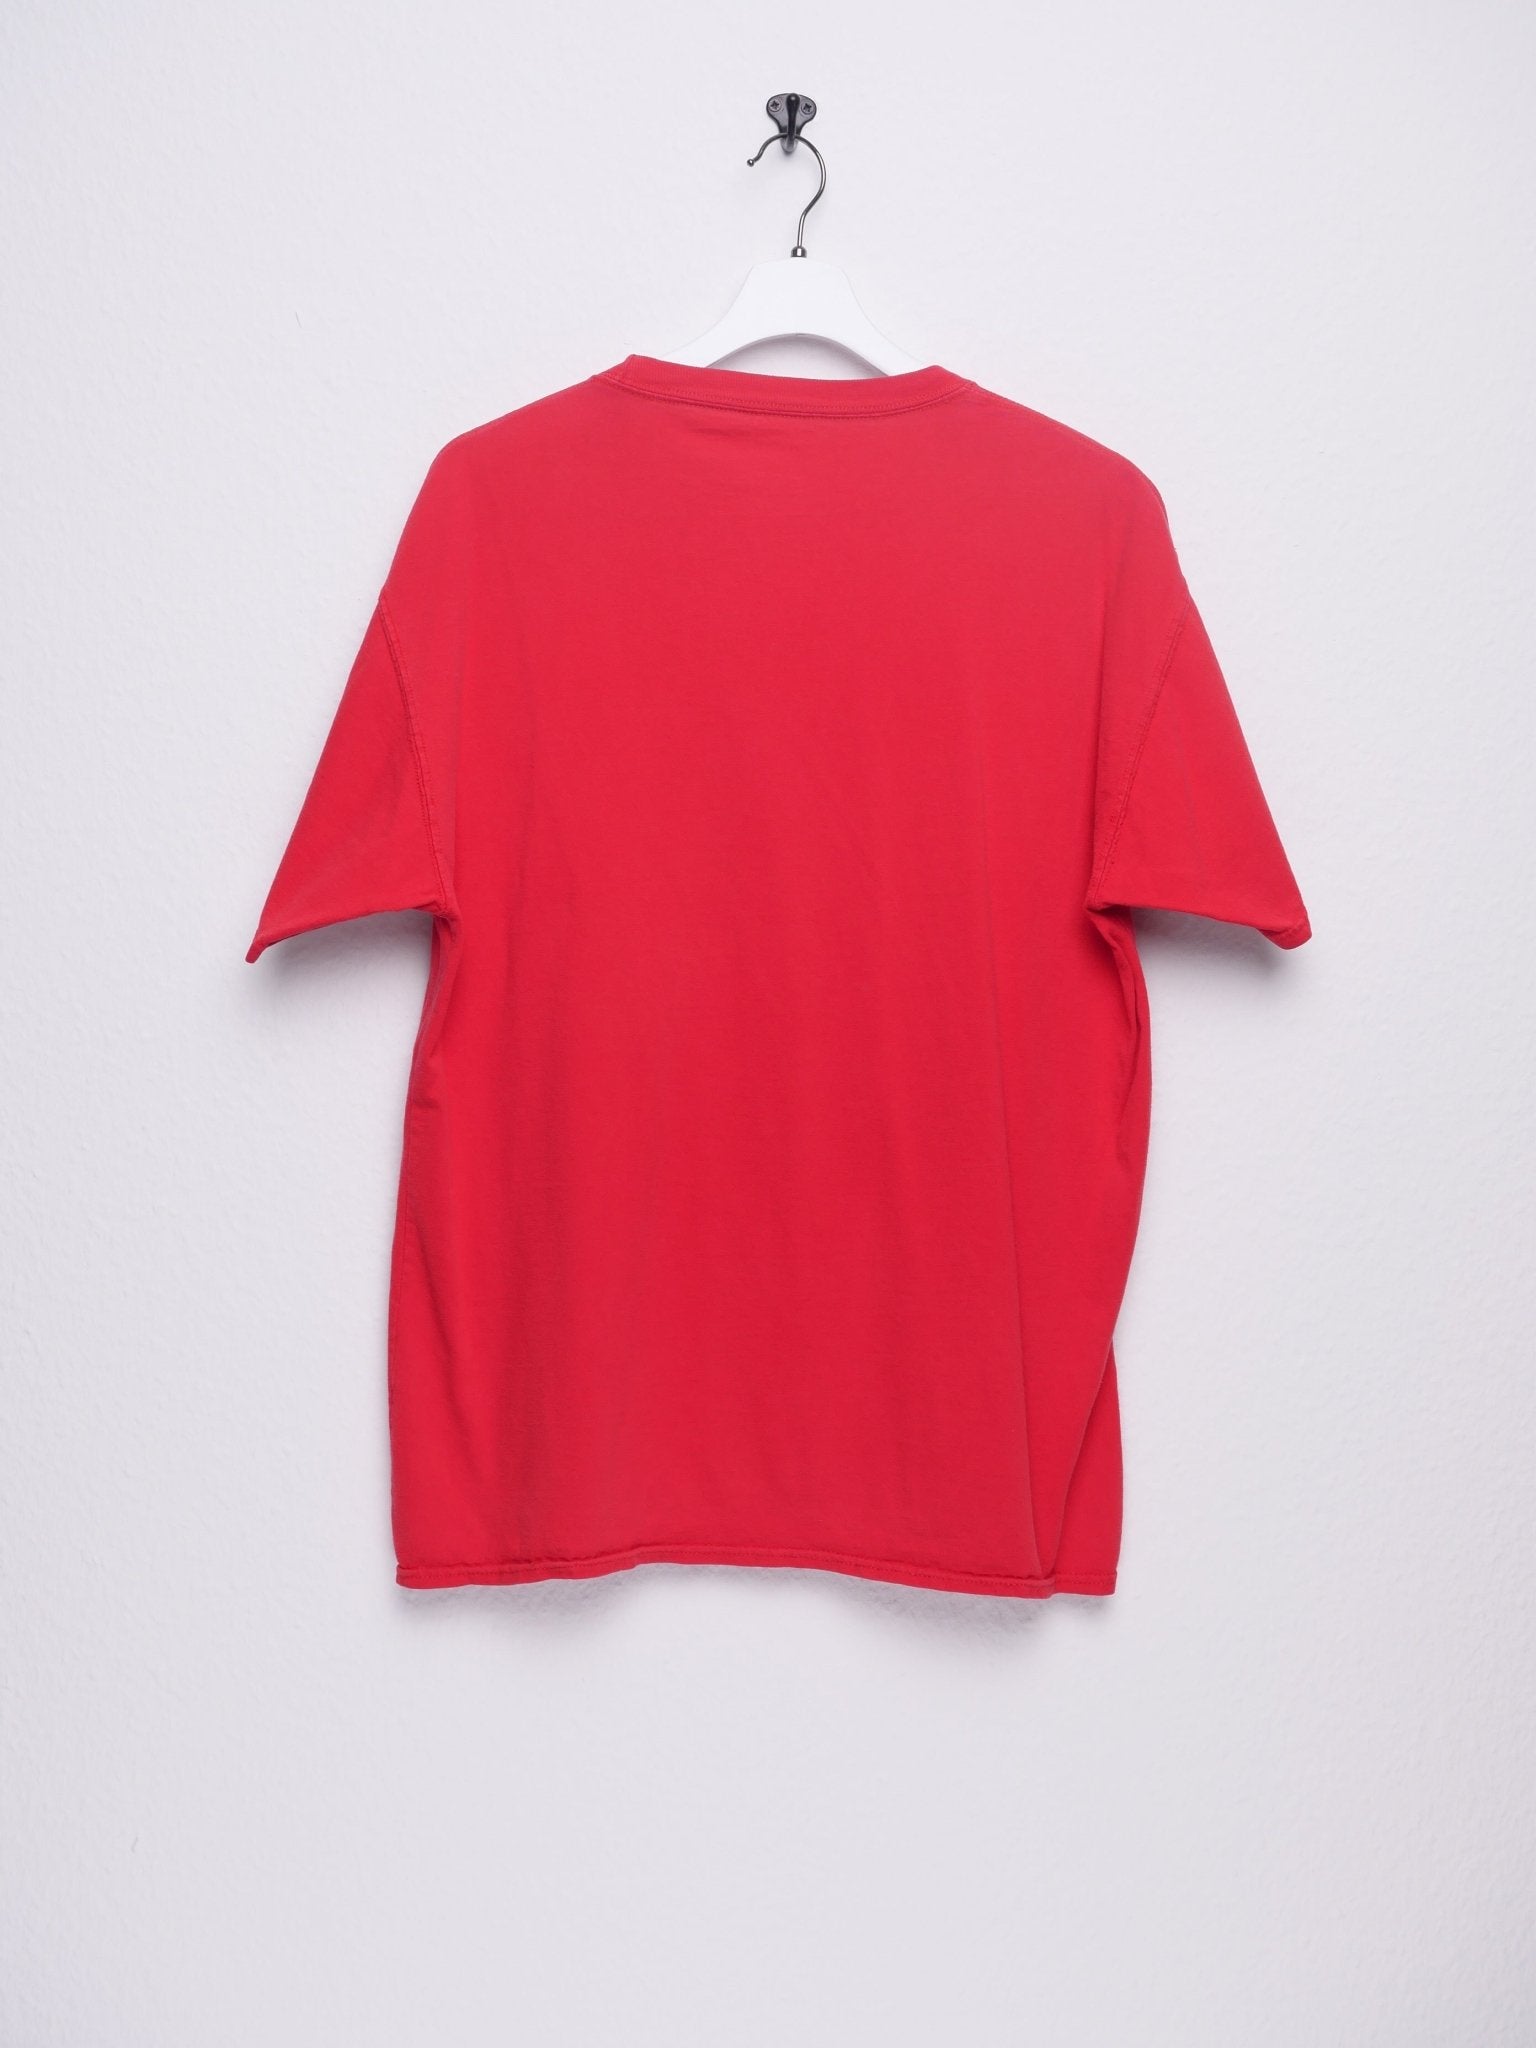 champion embroidered Logo red Shirt - Peeces